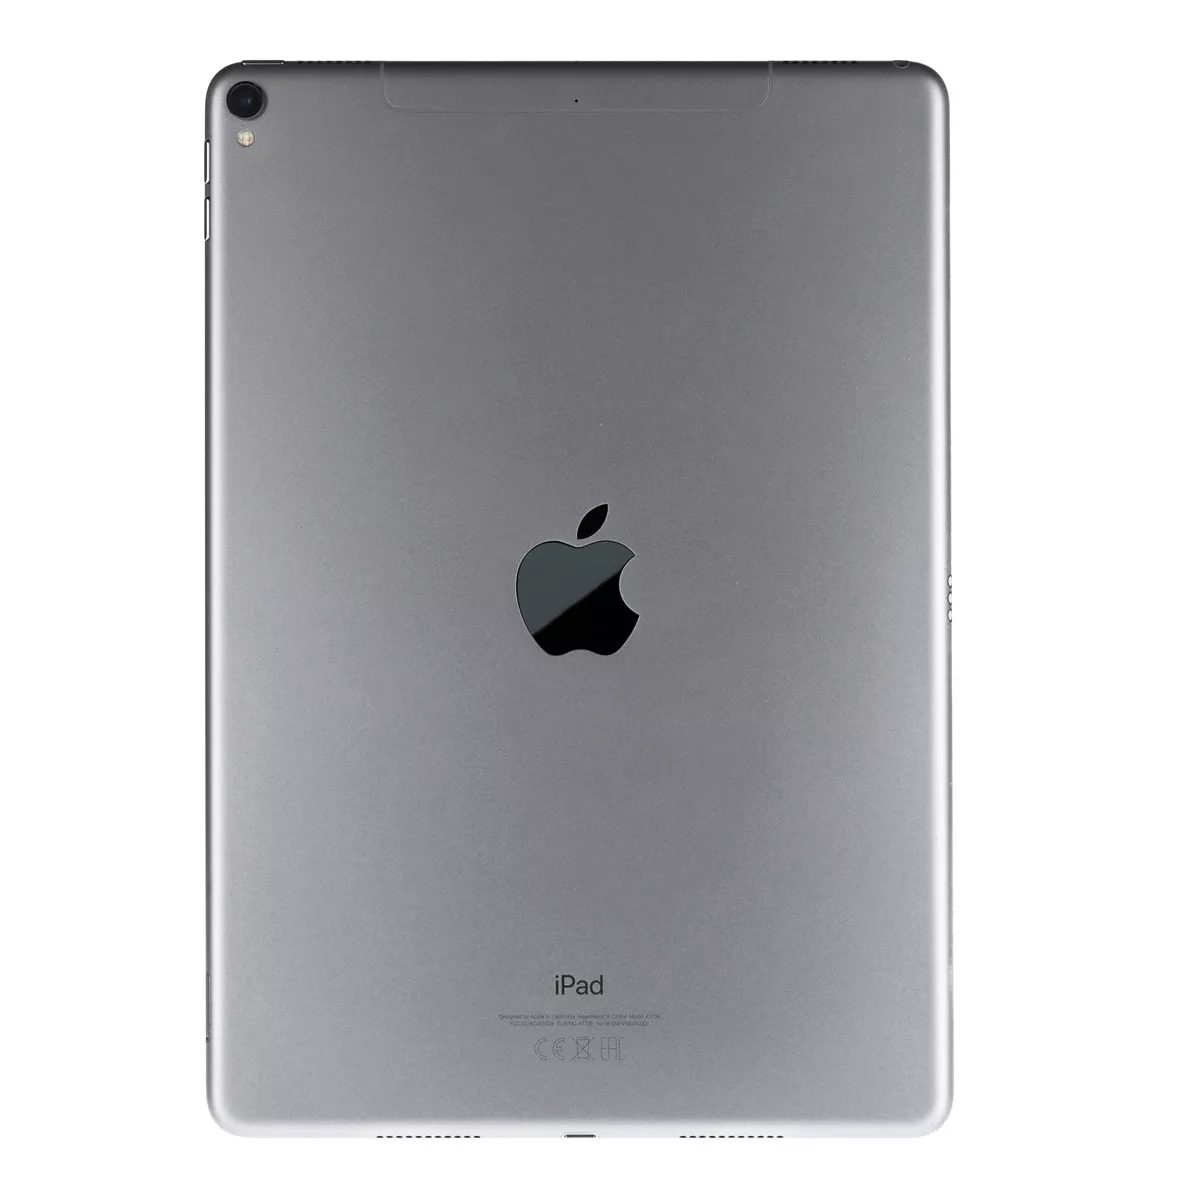 Apple iPad Pro 64 GB Wi-Fi Cell space-grey A1709 A+